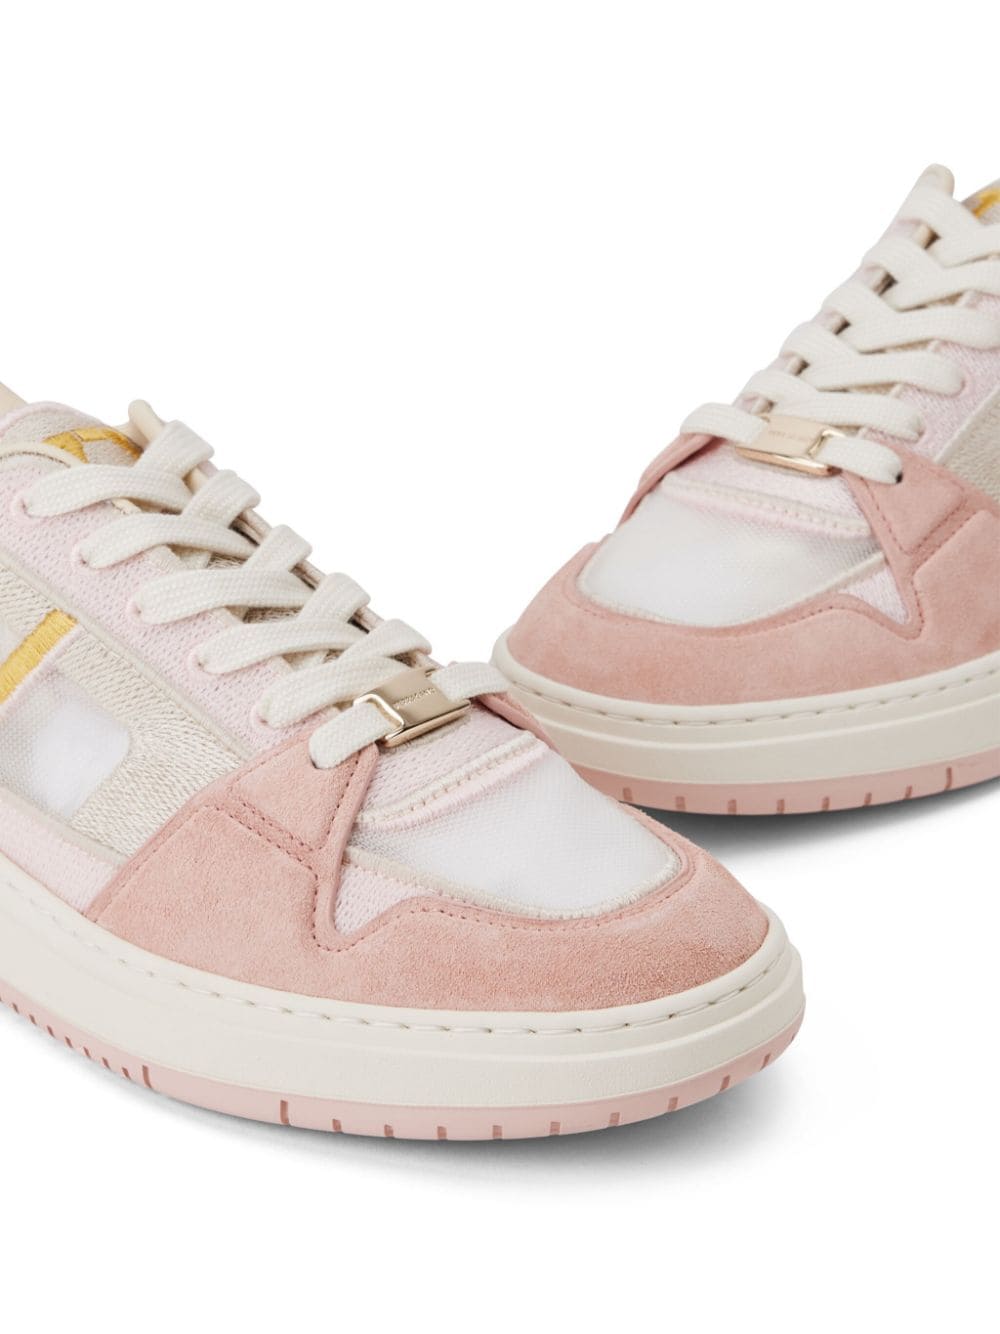 Ferragamo Mesh suede lace-up sneakers Pink